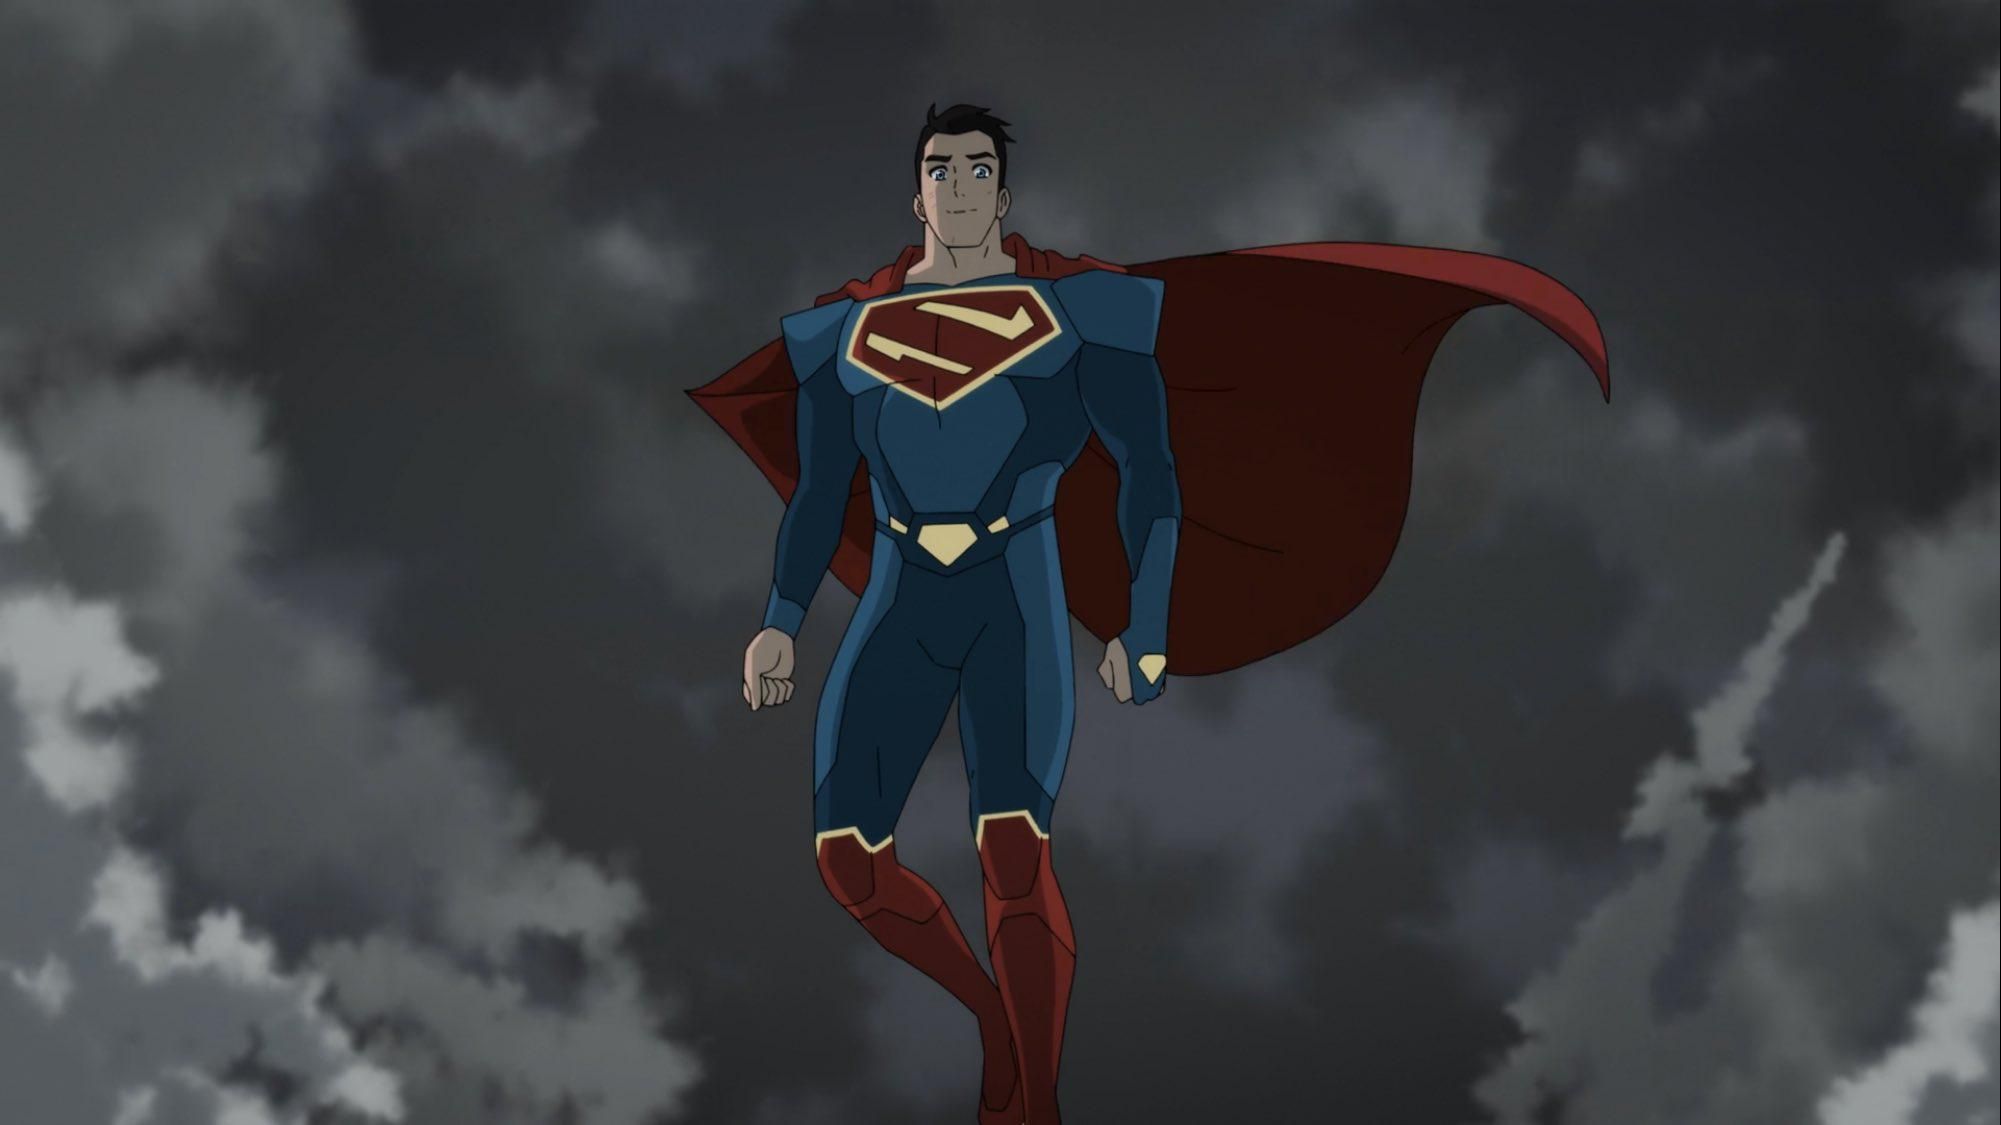 New Superman costume from the My Adventures with Superman cartoon. Similar to the classic, but a bit more armored on the shoulder pads and no red trunks